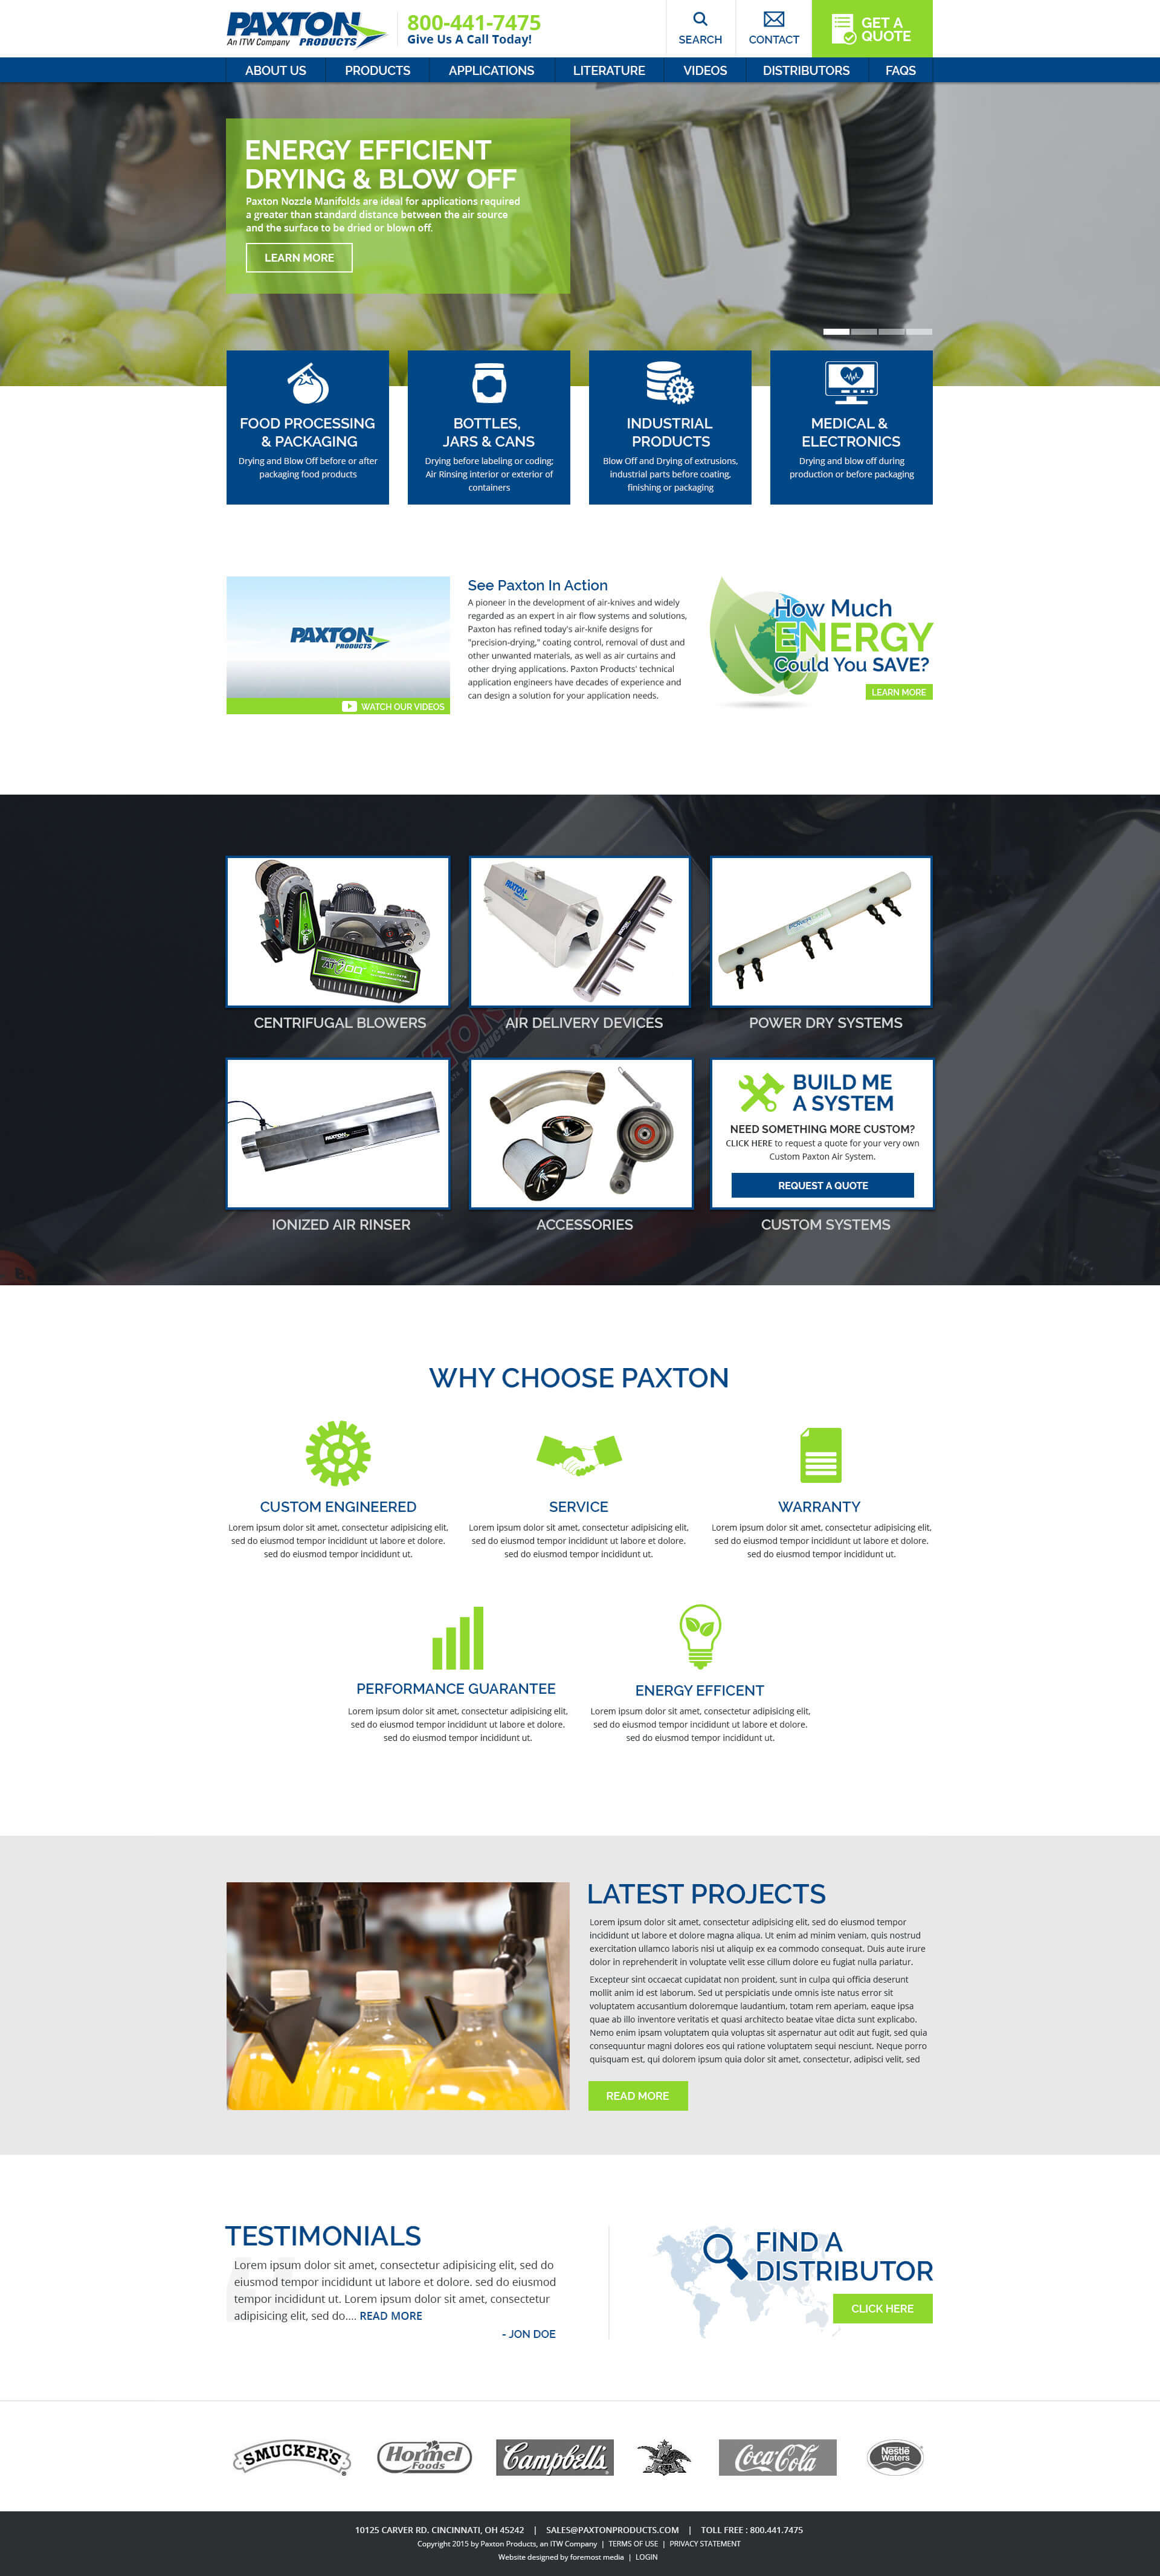 Example of the new and improved DNN website designed by Foremost Media for Paxton Products, an ITW Company